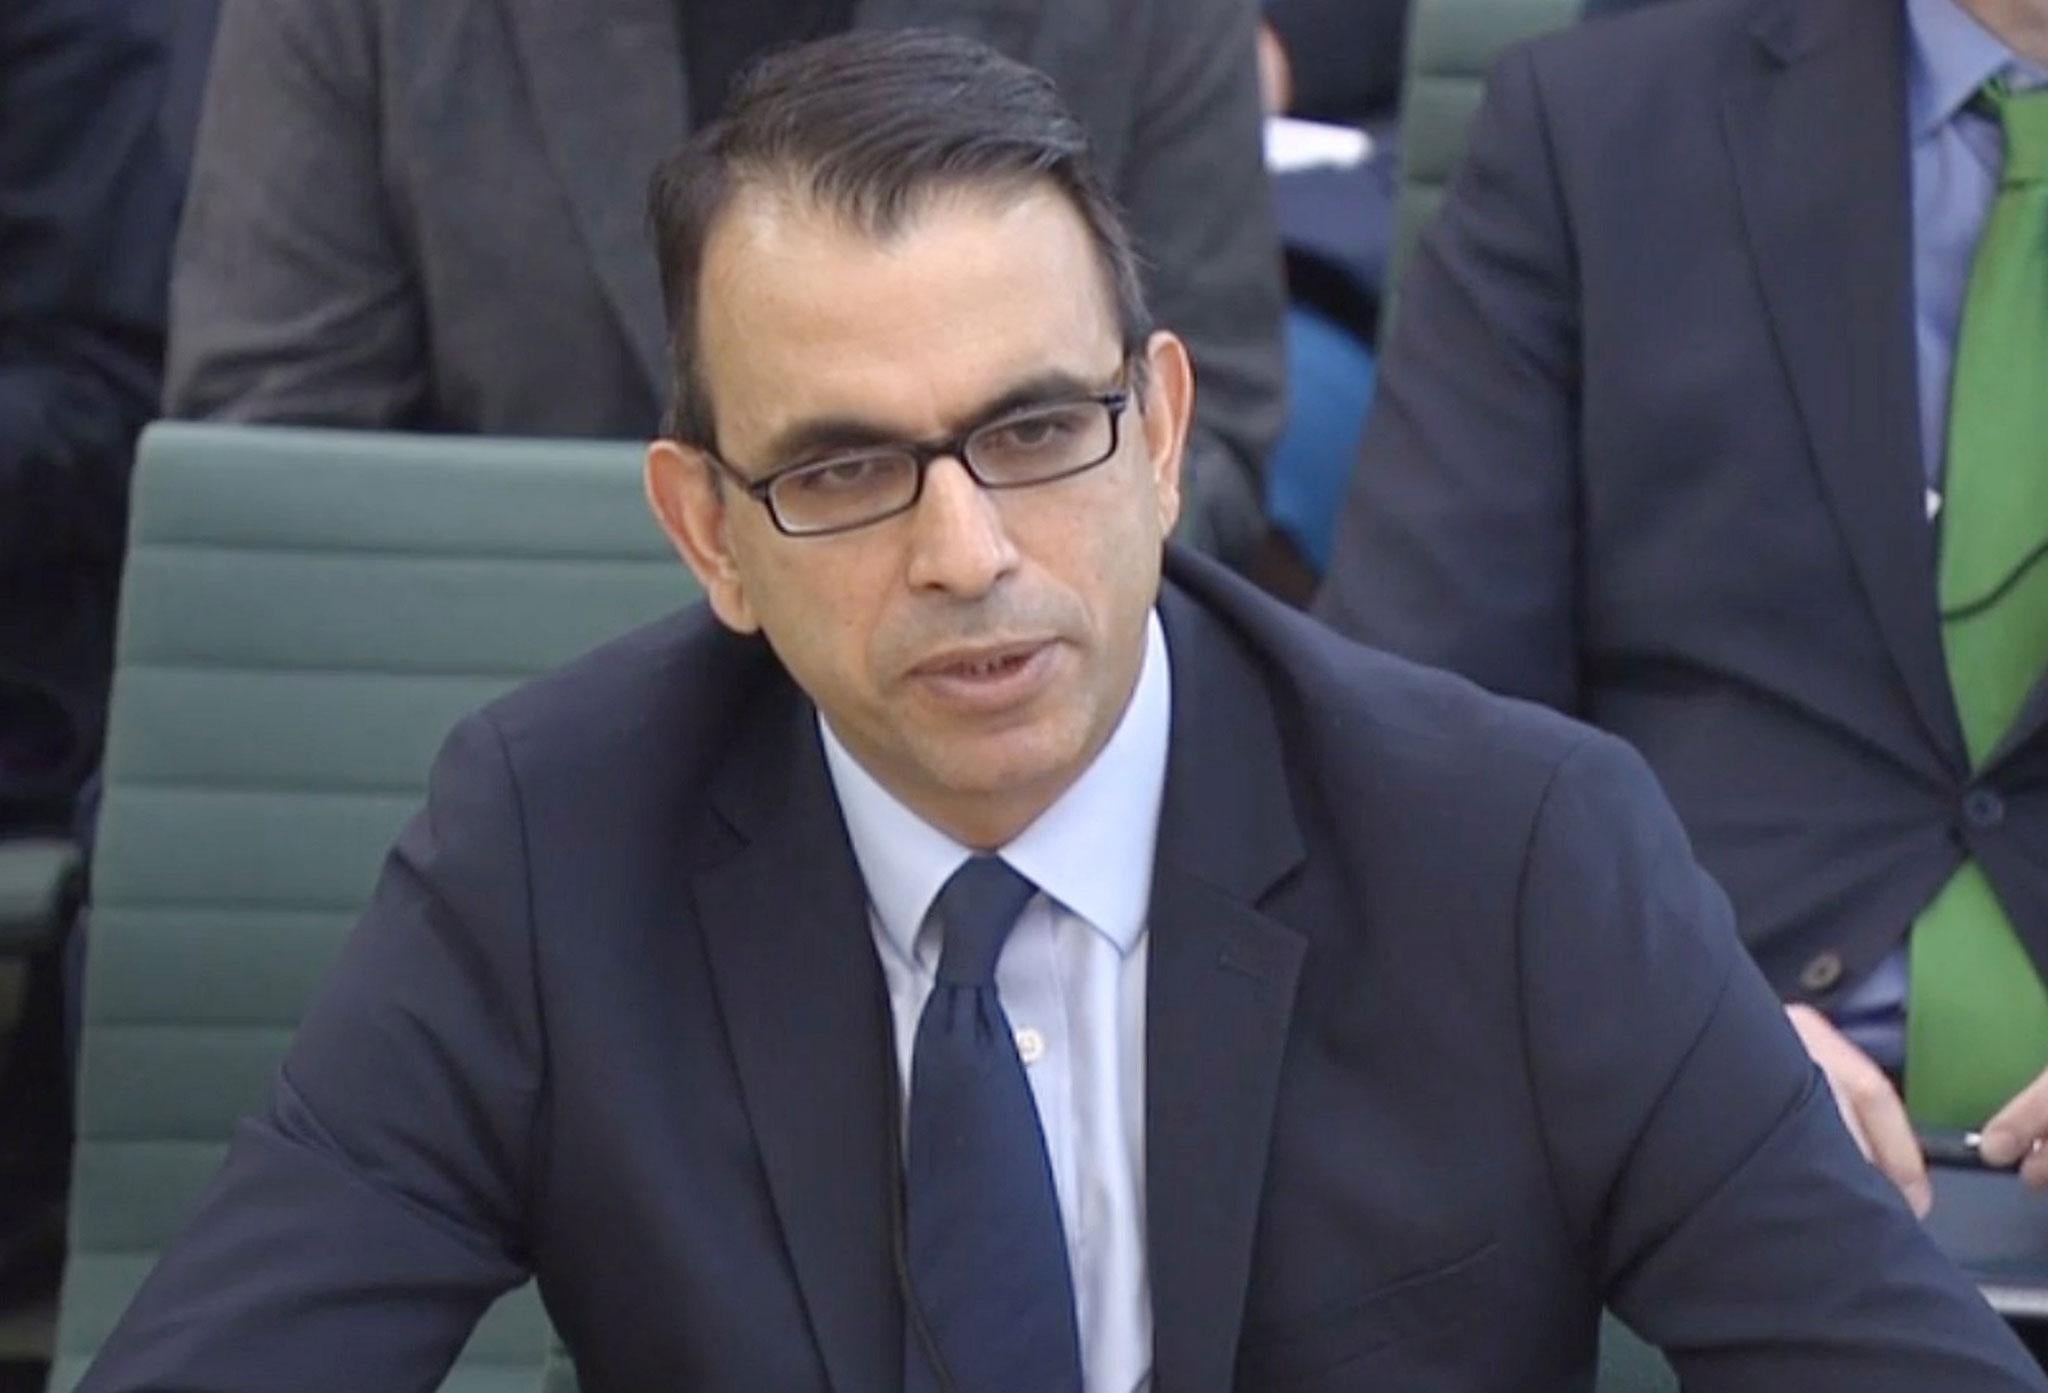 Zafar Khan, Carillion’s former chief financial officer, said he was ‘surprised at the outcome that eventually came to pass’